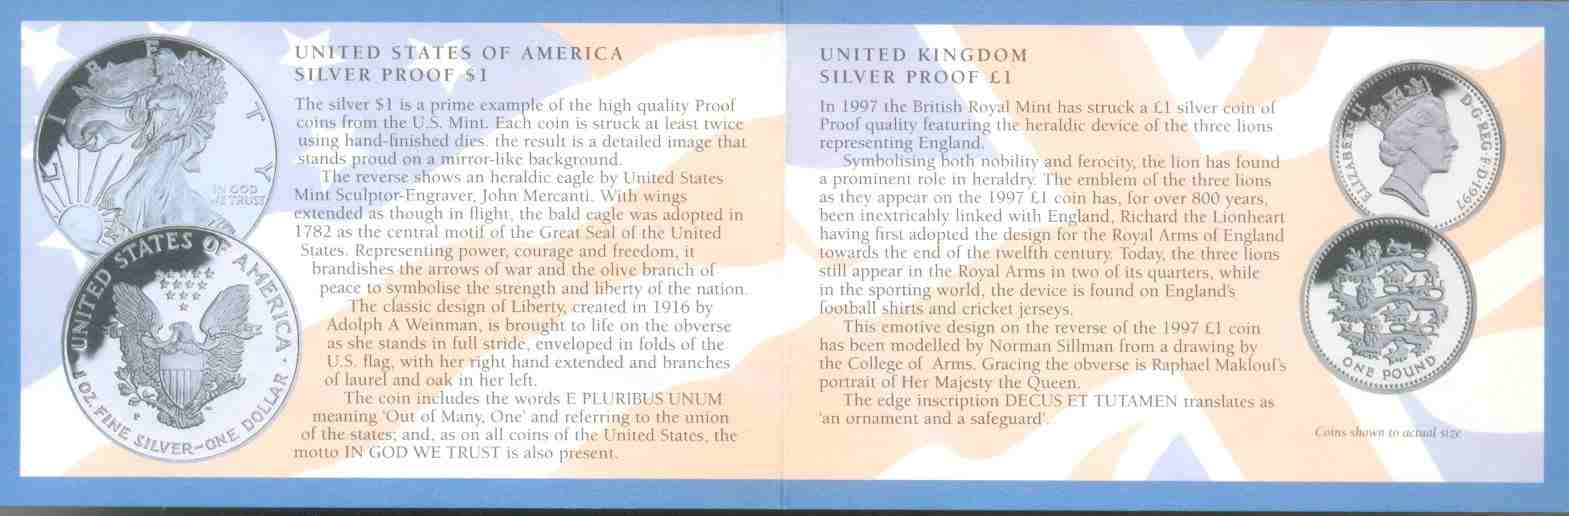 USA_Great_Britain_1997_2_coin_silver_proof_set_Symbols_of_Freedom_cert_rev.jpg